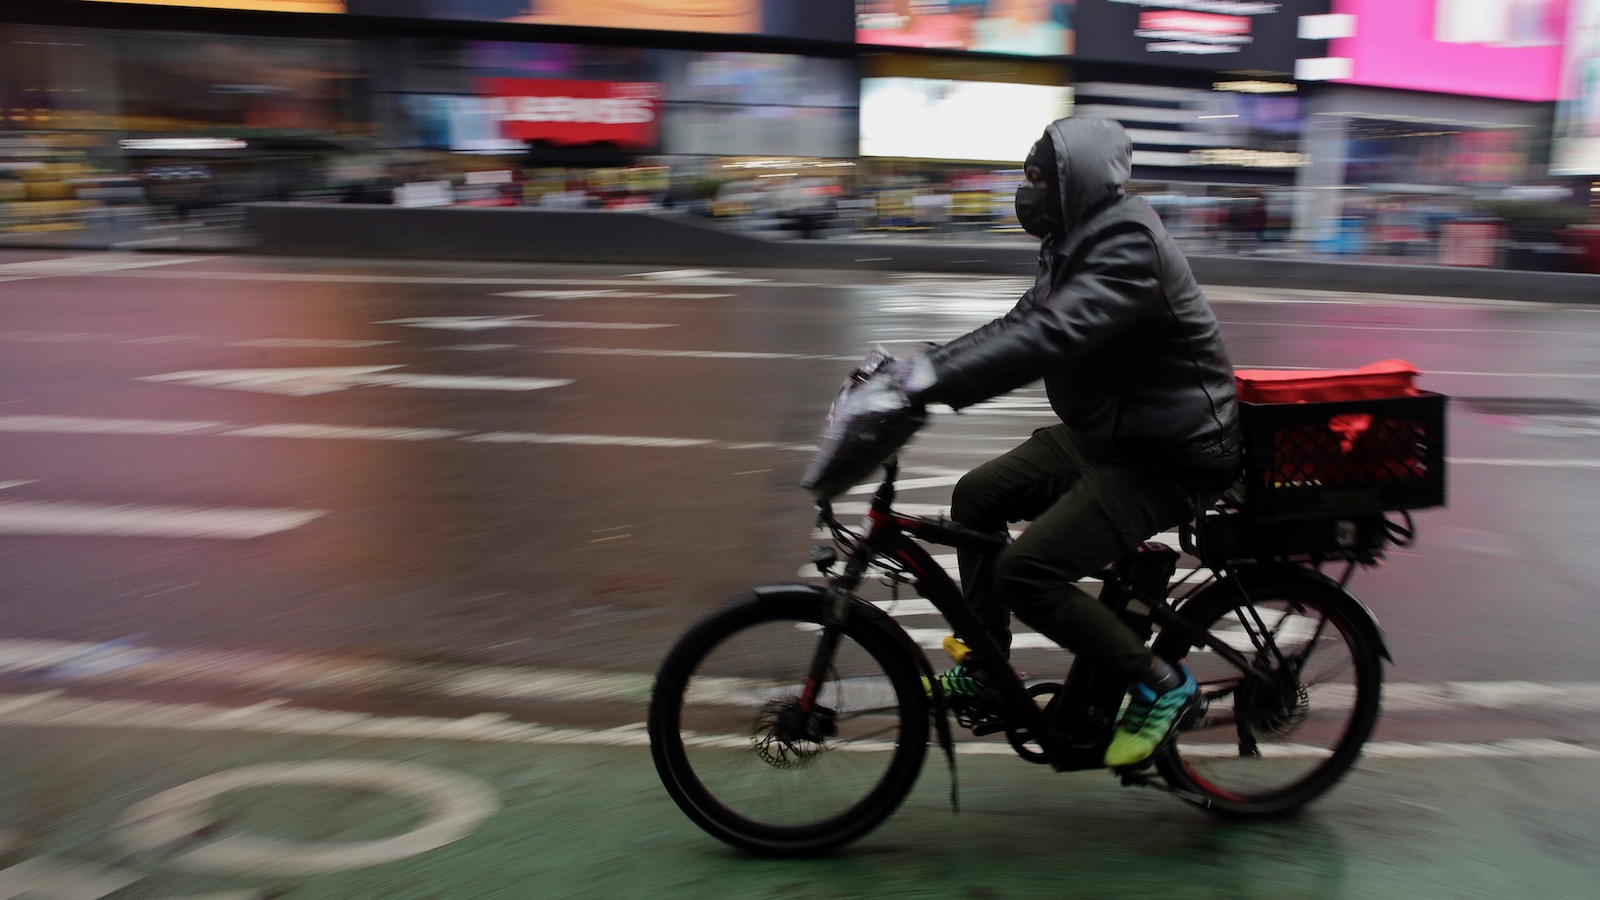 A man rides an e-bike through Times Square on February 21, 2023 in New York City.